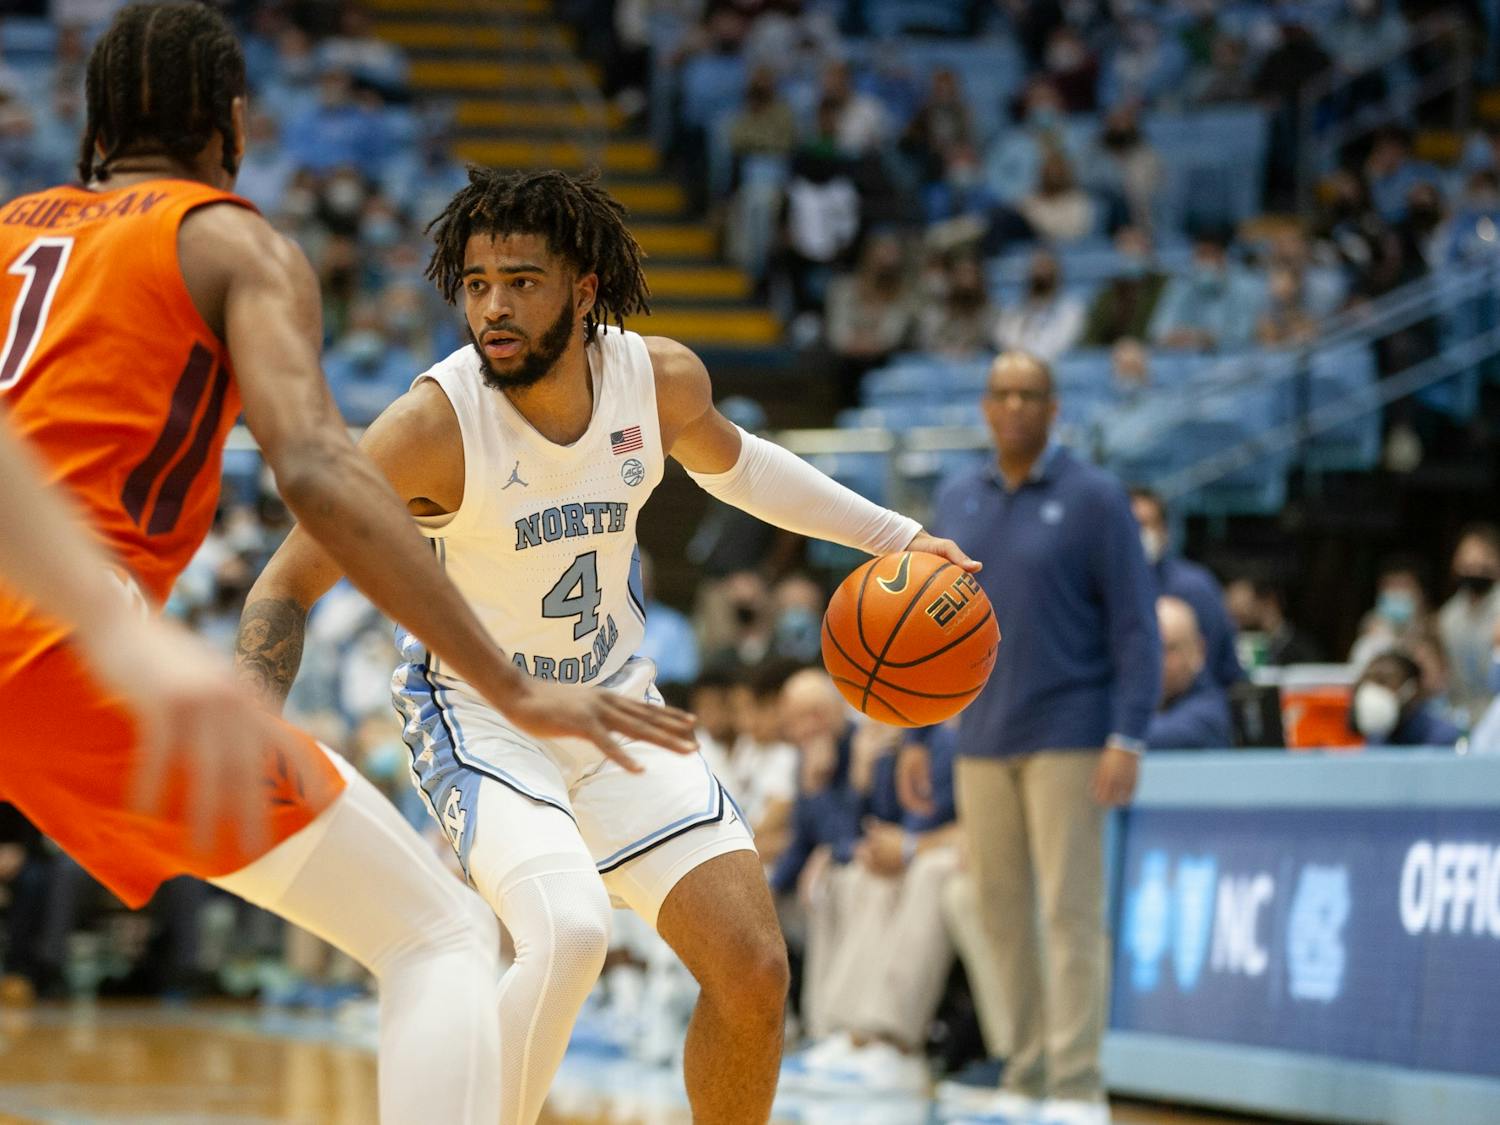 UNC sophomore guard RJ Davis during UNC Men's basketball's home game against Virginia Tech on Monday, Jan. 24, 2022, at the Dean Smith Center.